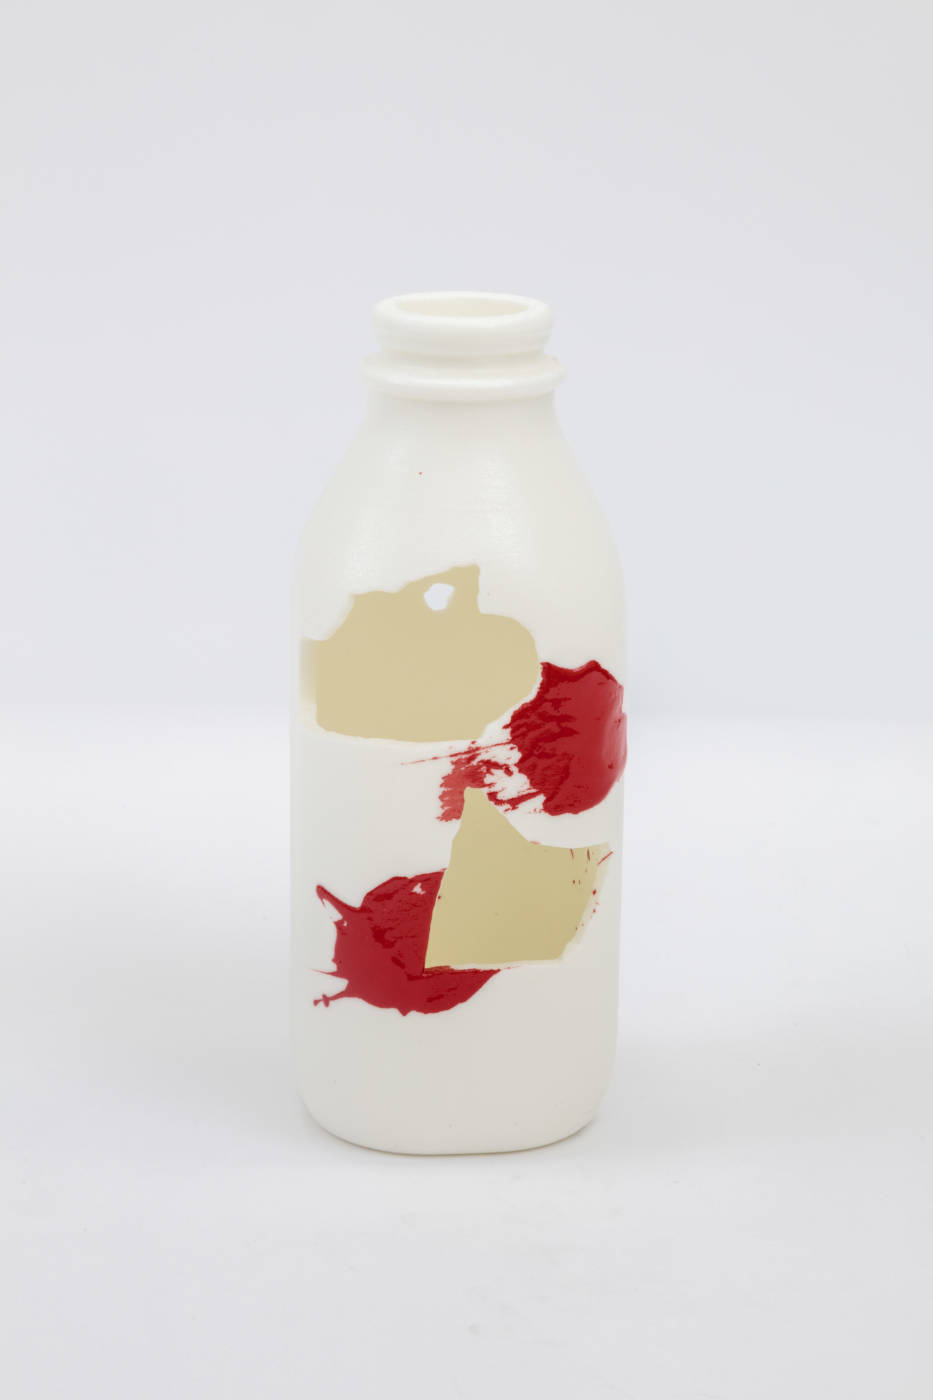 Bottle sculpture with splashes of cream and red color